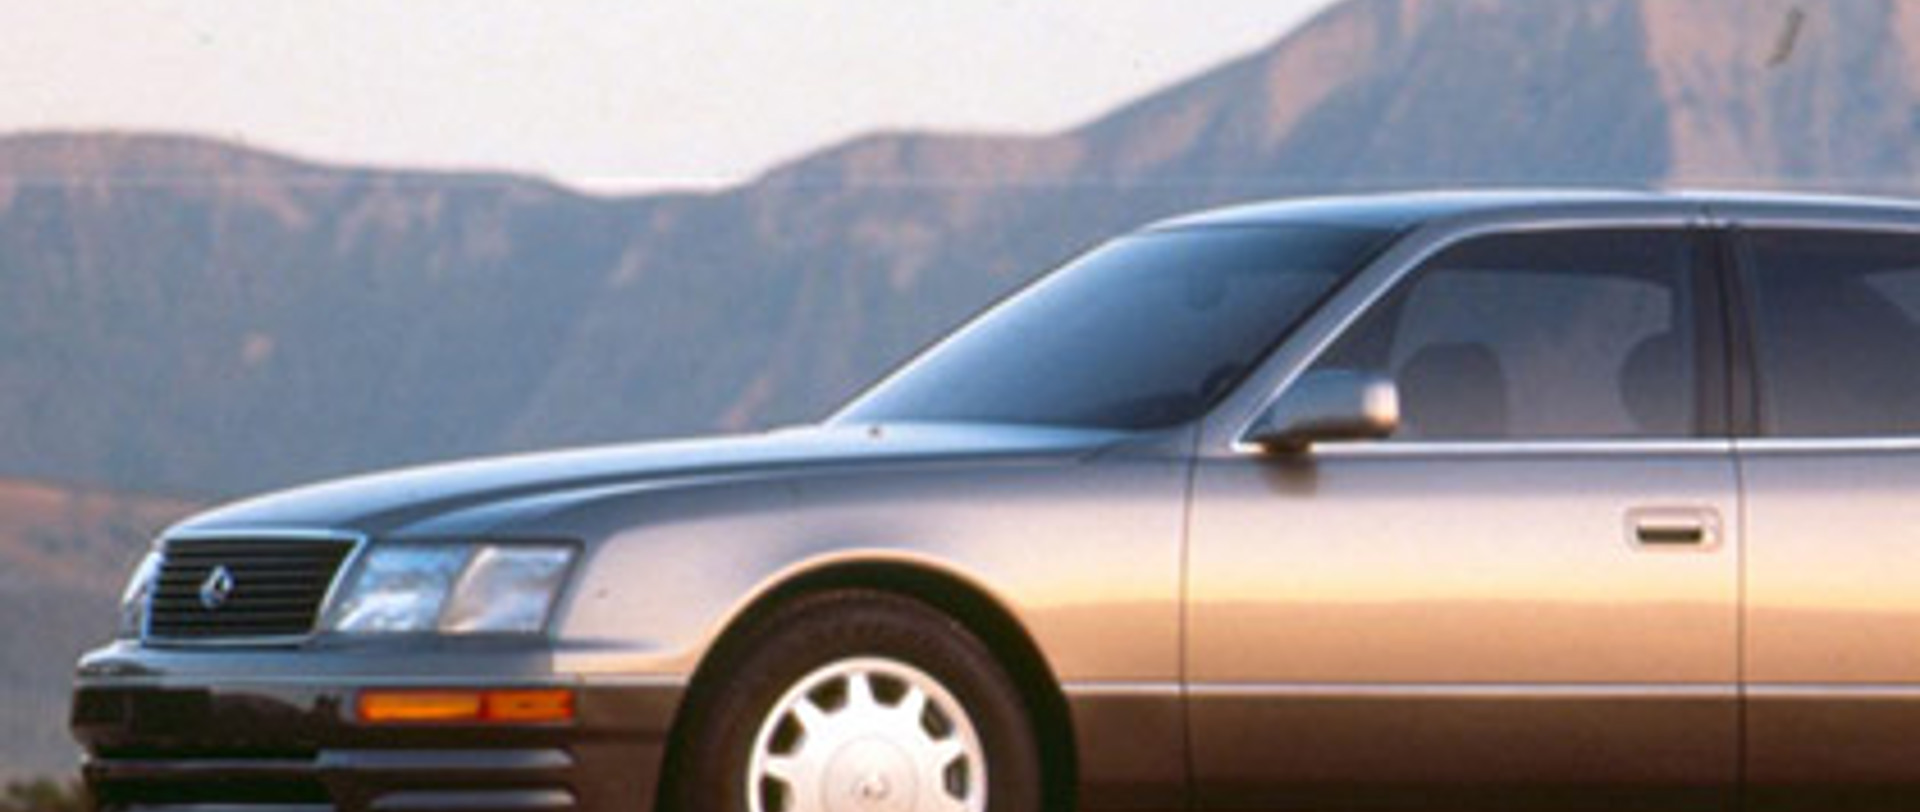 THE LAUNCH OF SECOND GENERATION LS400